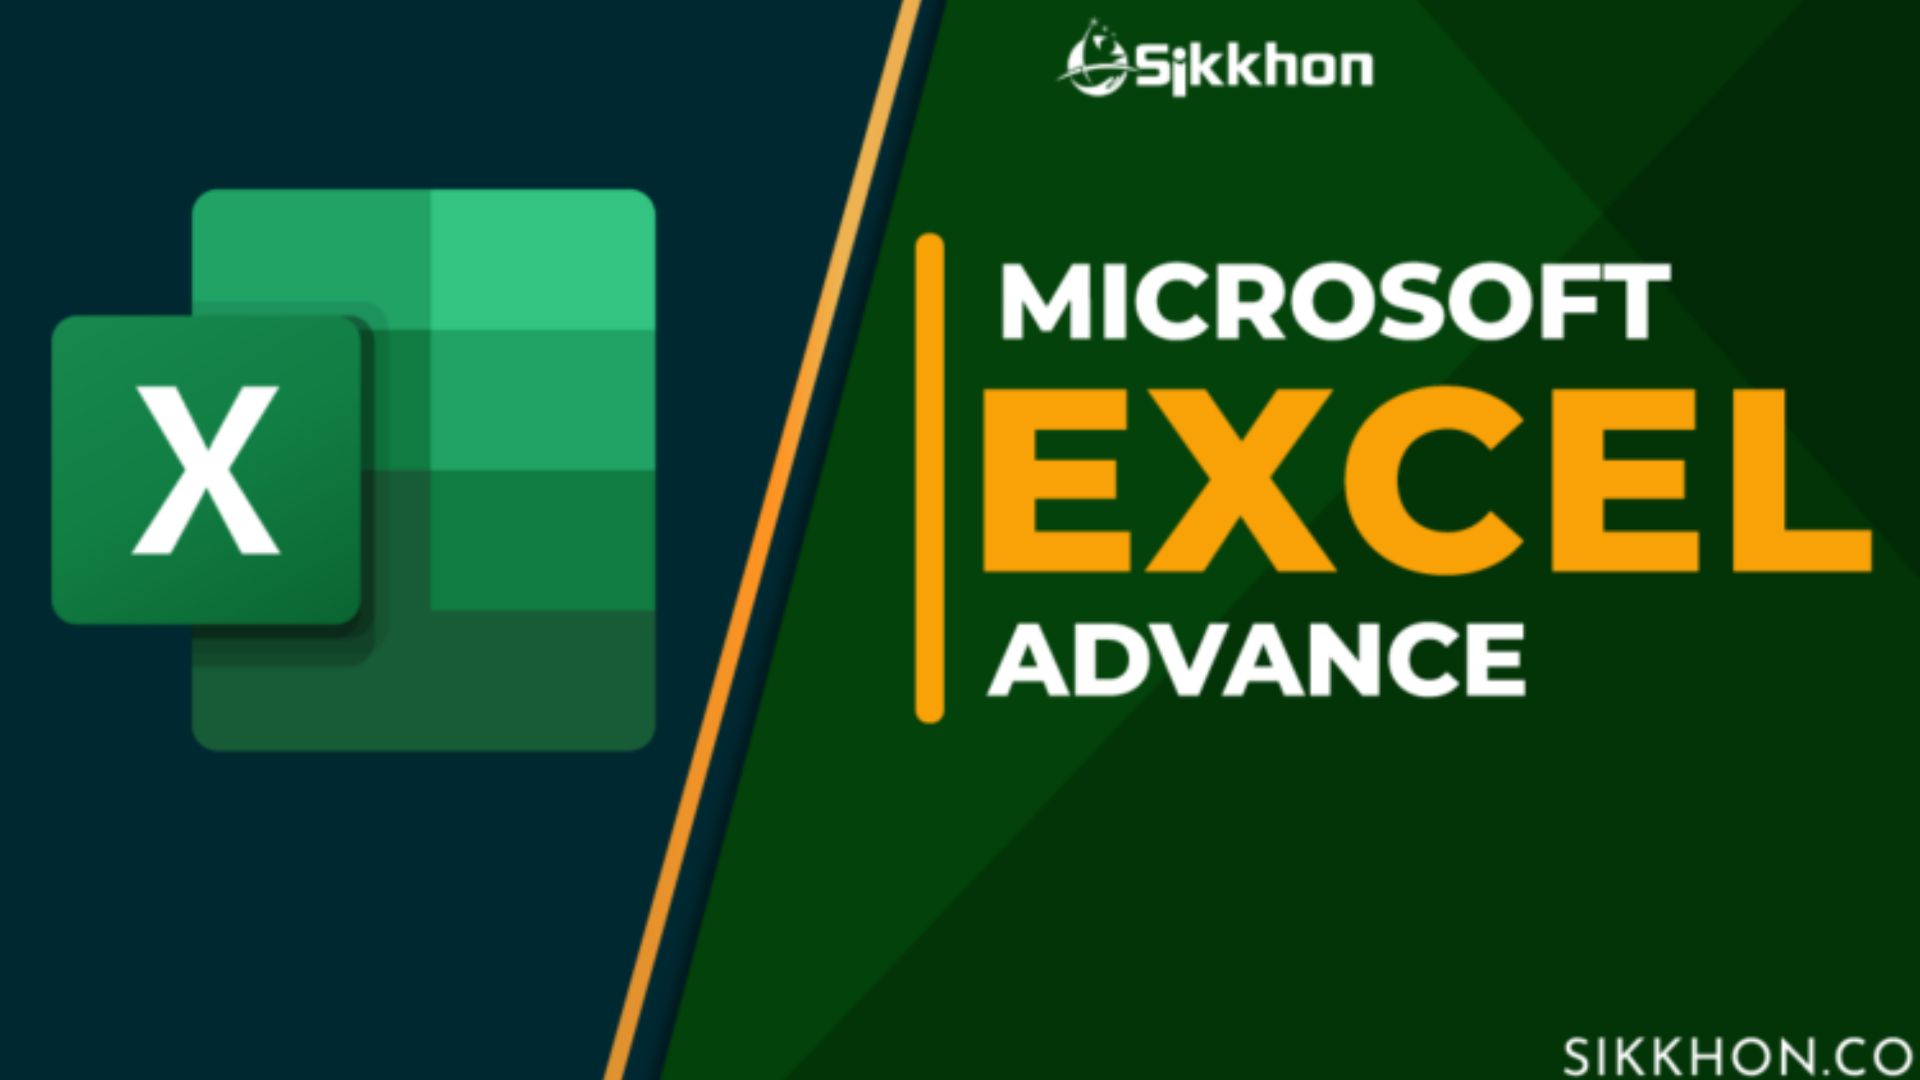  Master Microsoft Excel with Sikkhon's Advanced Course